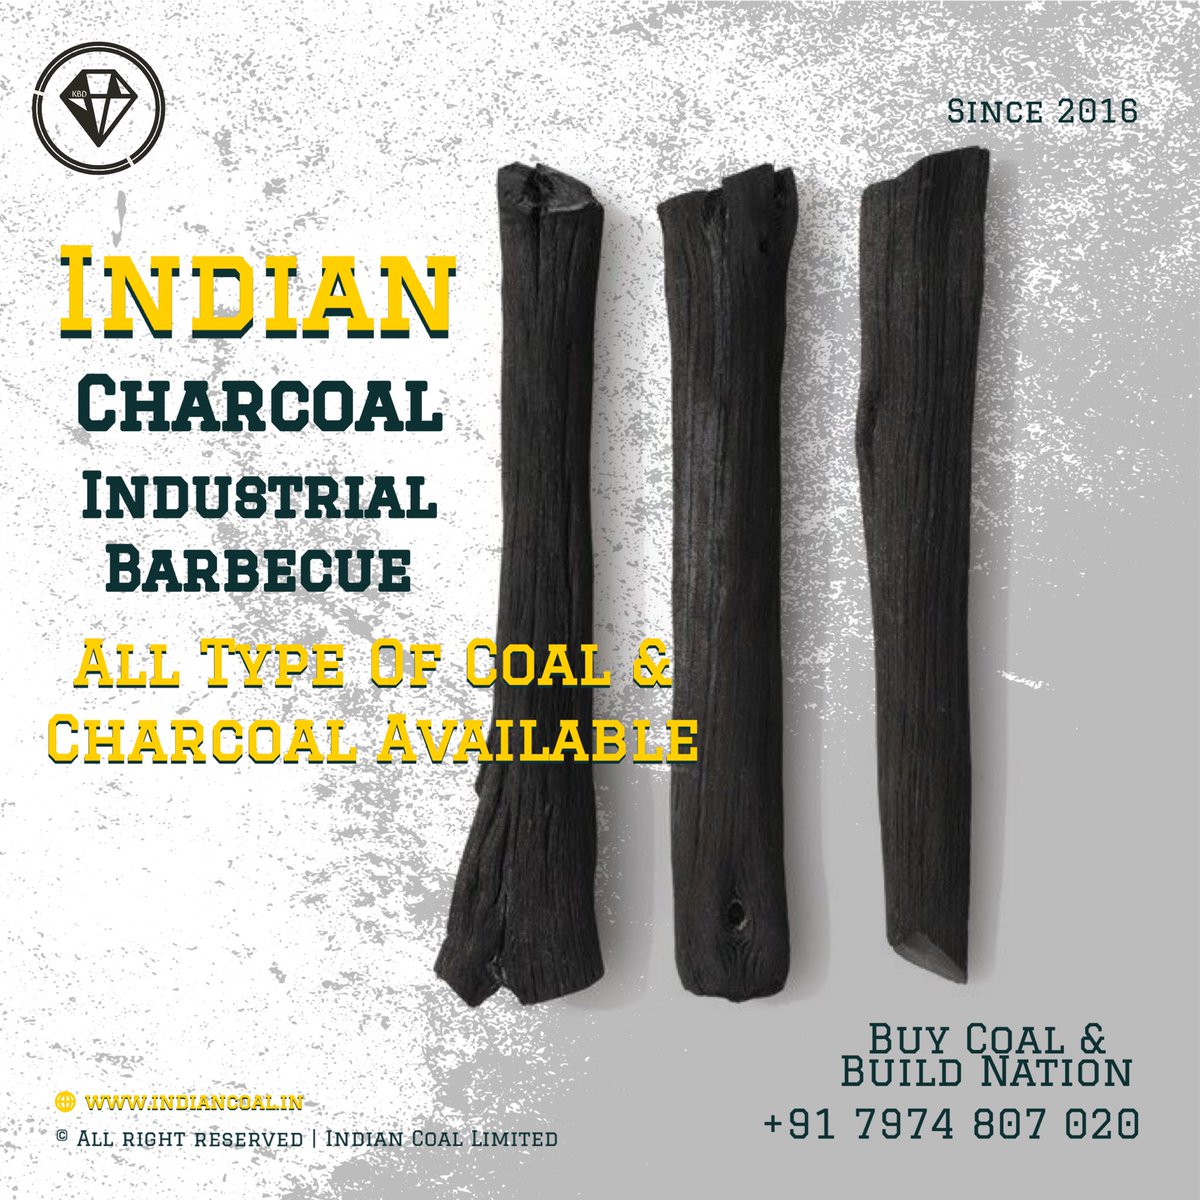 All type of coal & charcoal available.
#coalkings #business #coalmining #indonesia #shisha #restaurant #barbecue #ecommerce #usa🇺🇸 #steamcoal #Retail #smoke #SmallBusiness #bhopal #indian #bbq #sugarmill #industry #industrial #india  #indoreindia #indore #coal #indiabusiness #b2b